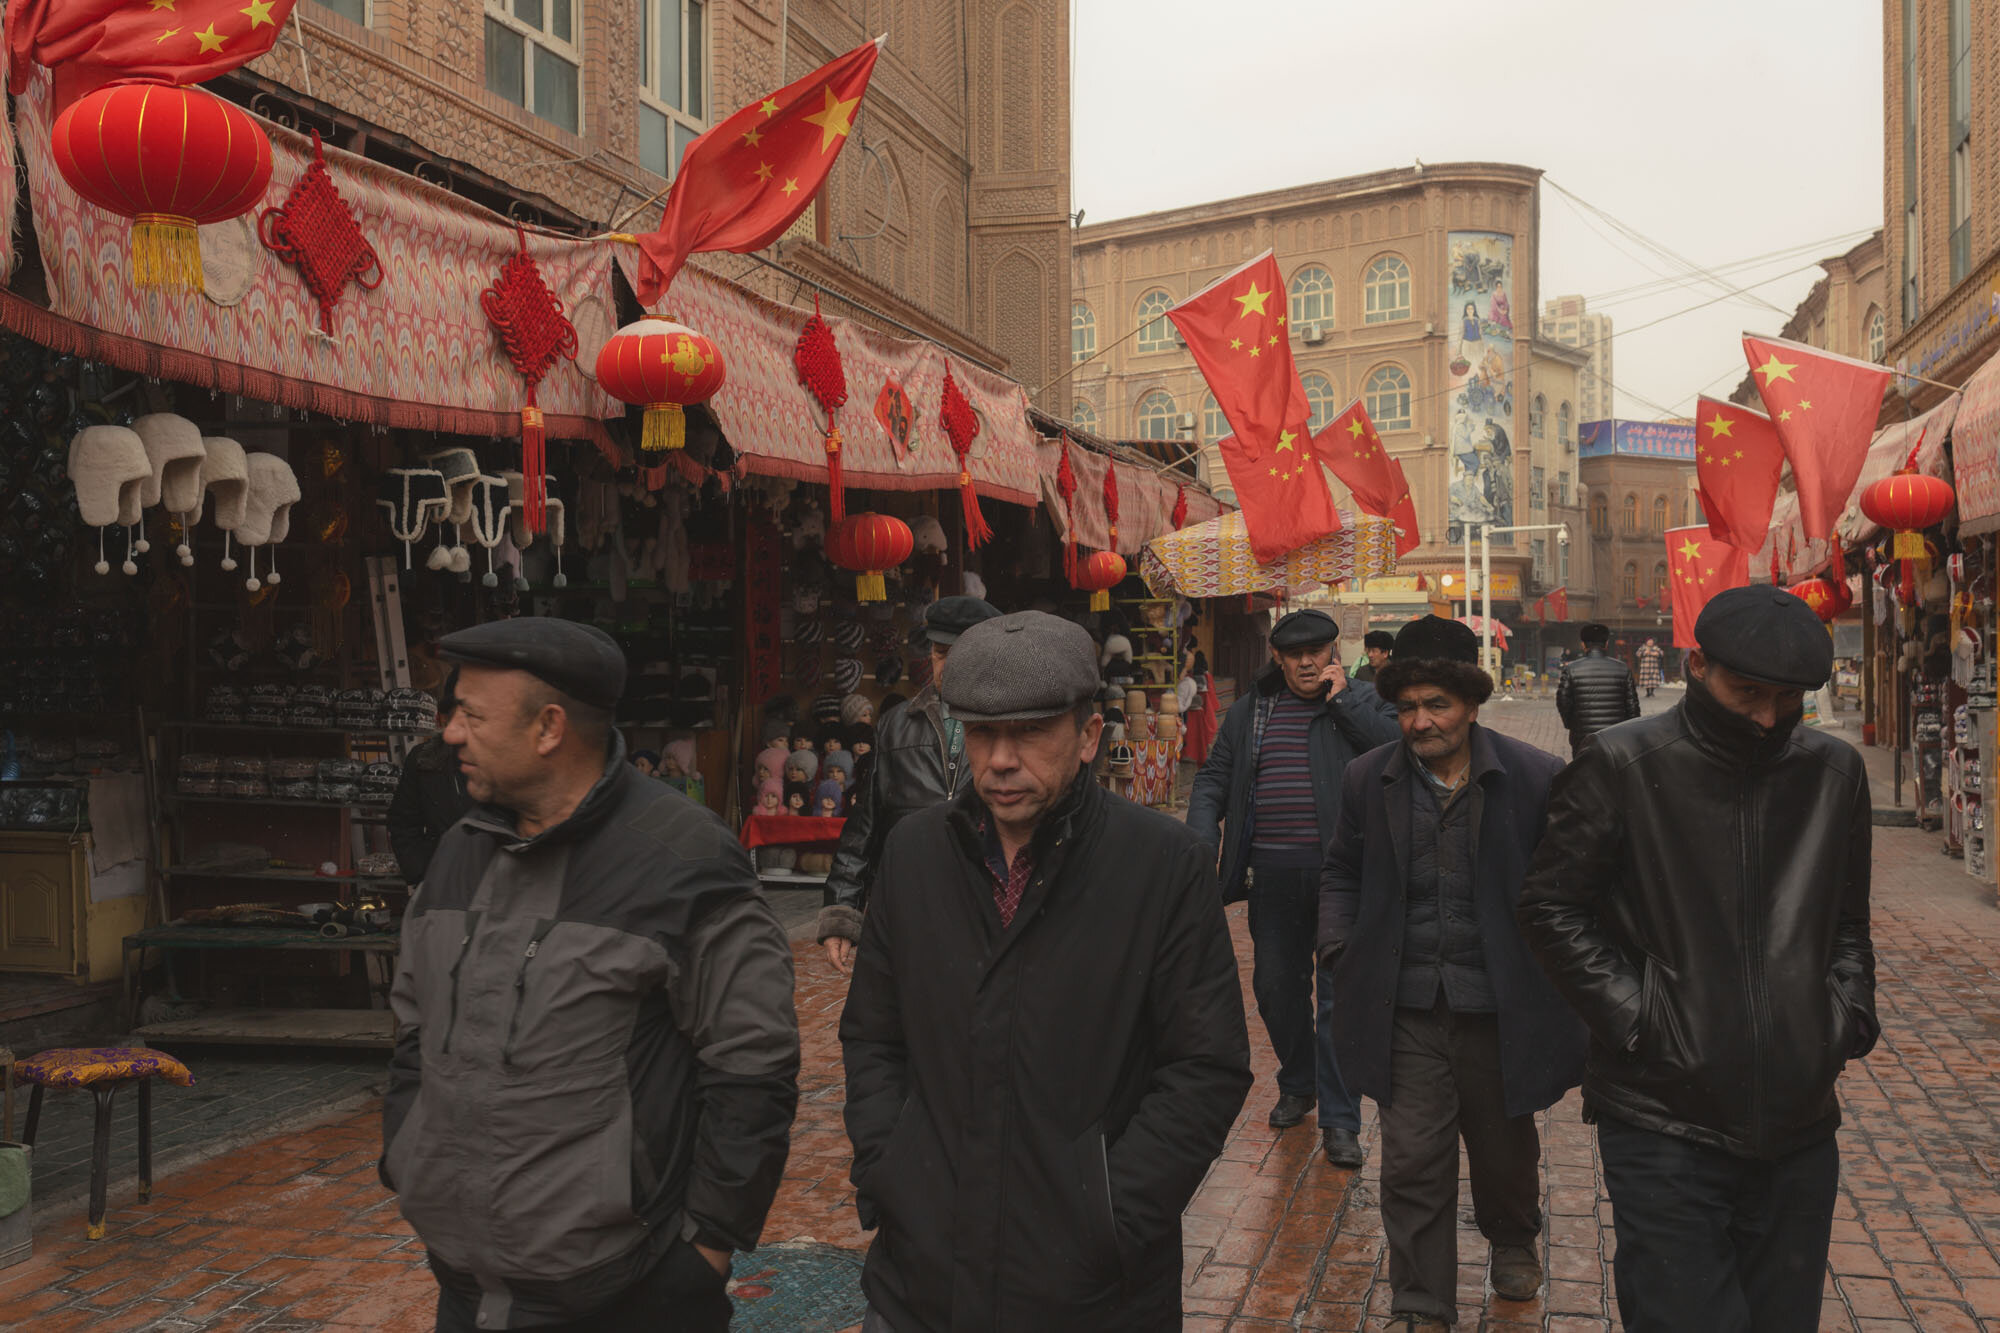  January 31st 2019. Kashgar, Xinjiang province. Uighur-minority men walking in a commercial street full of Chinese flags near the Idkah mosque. 